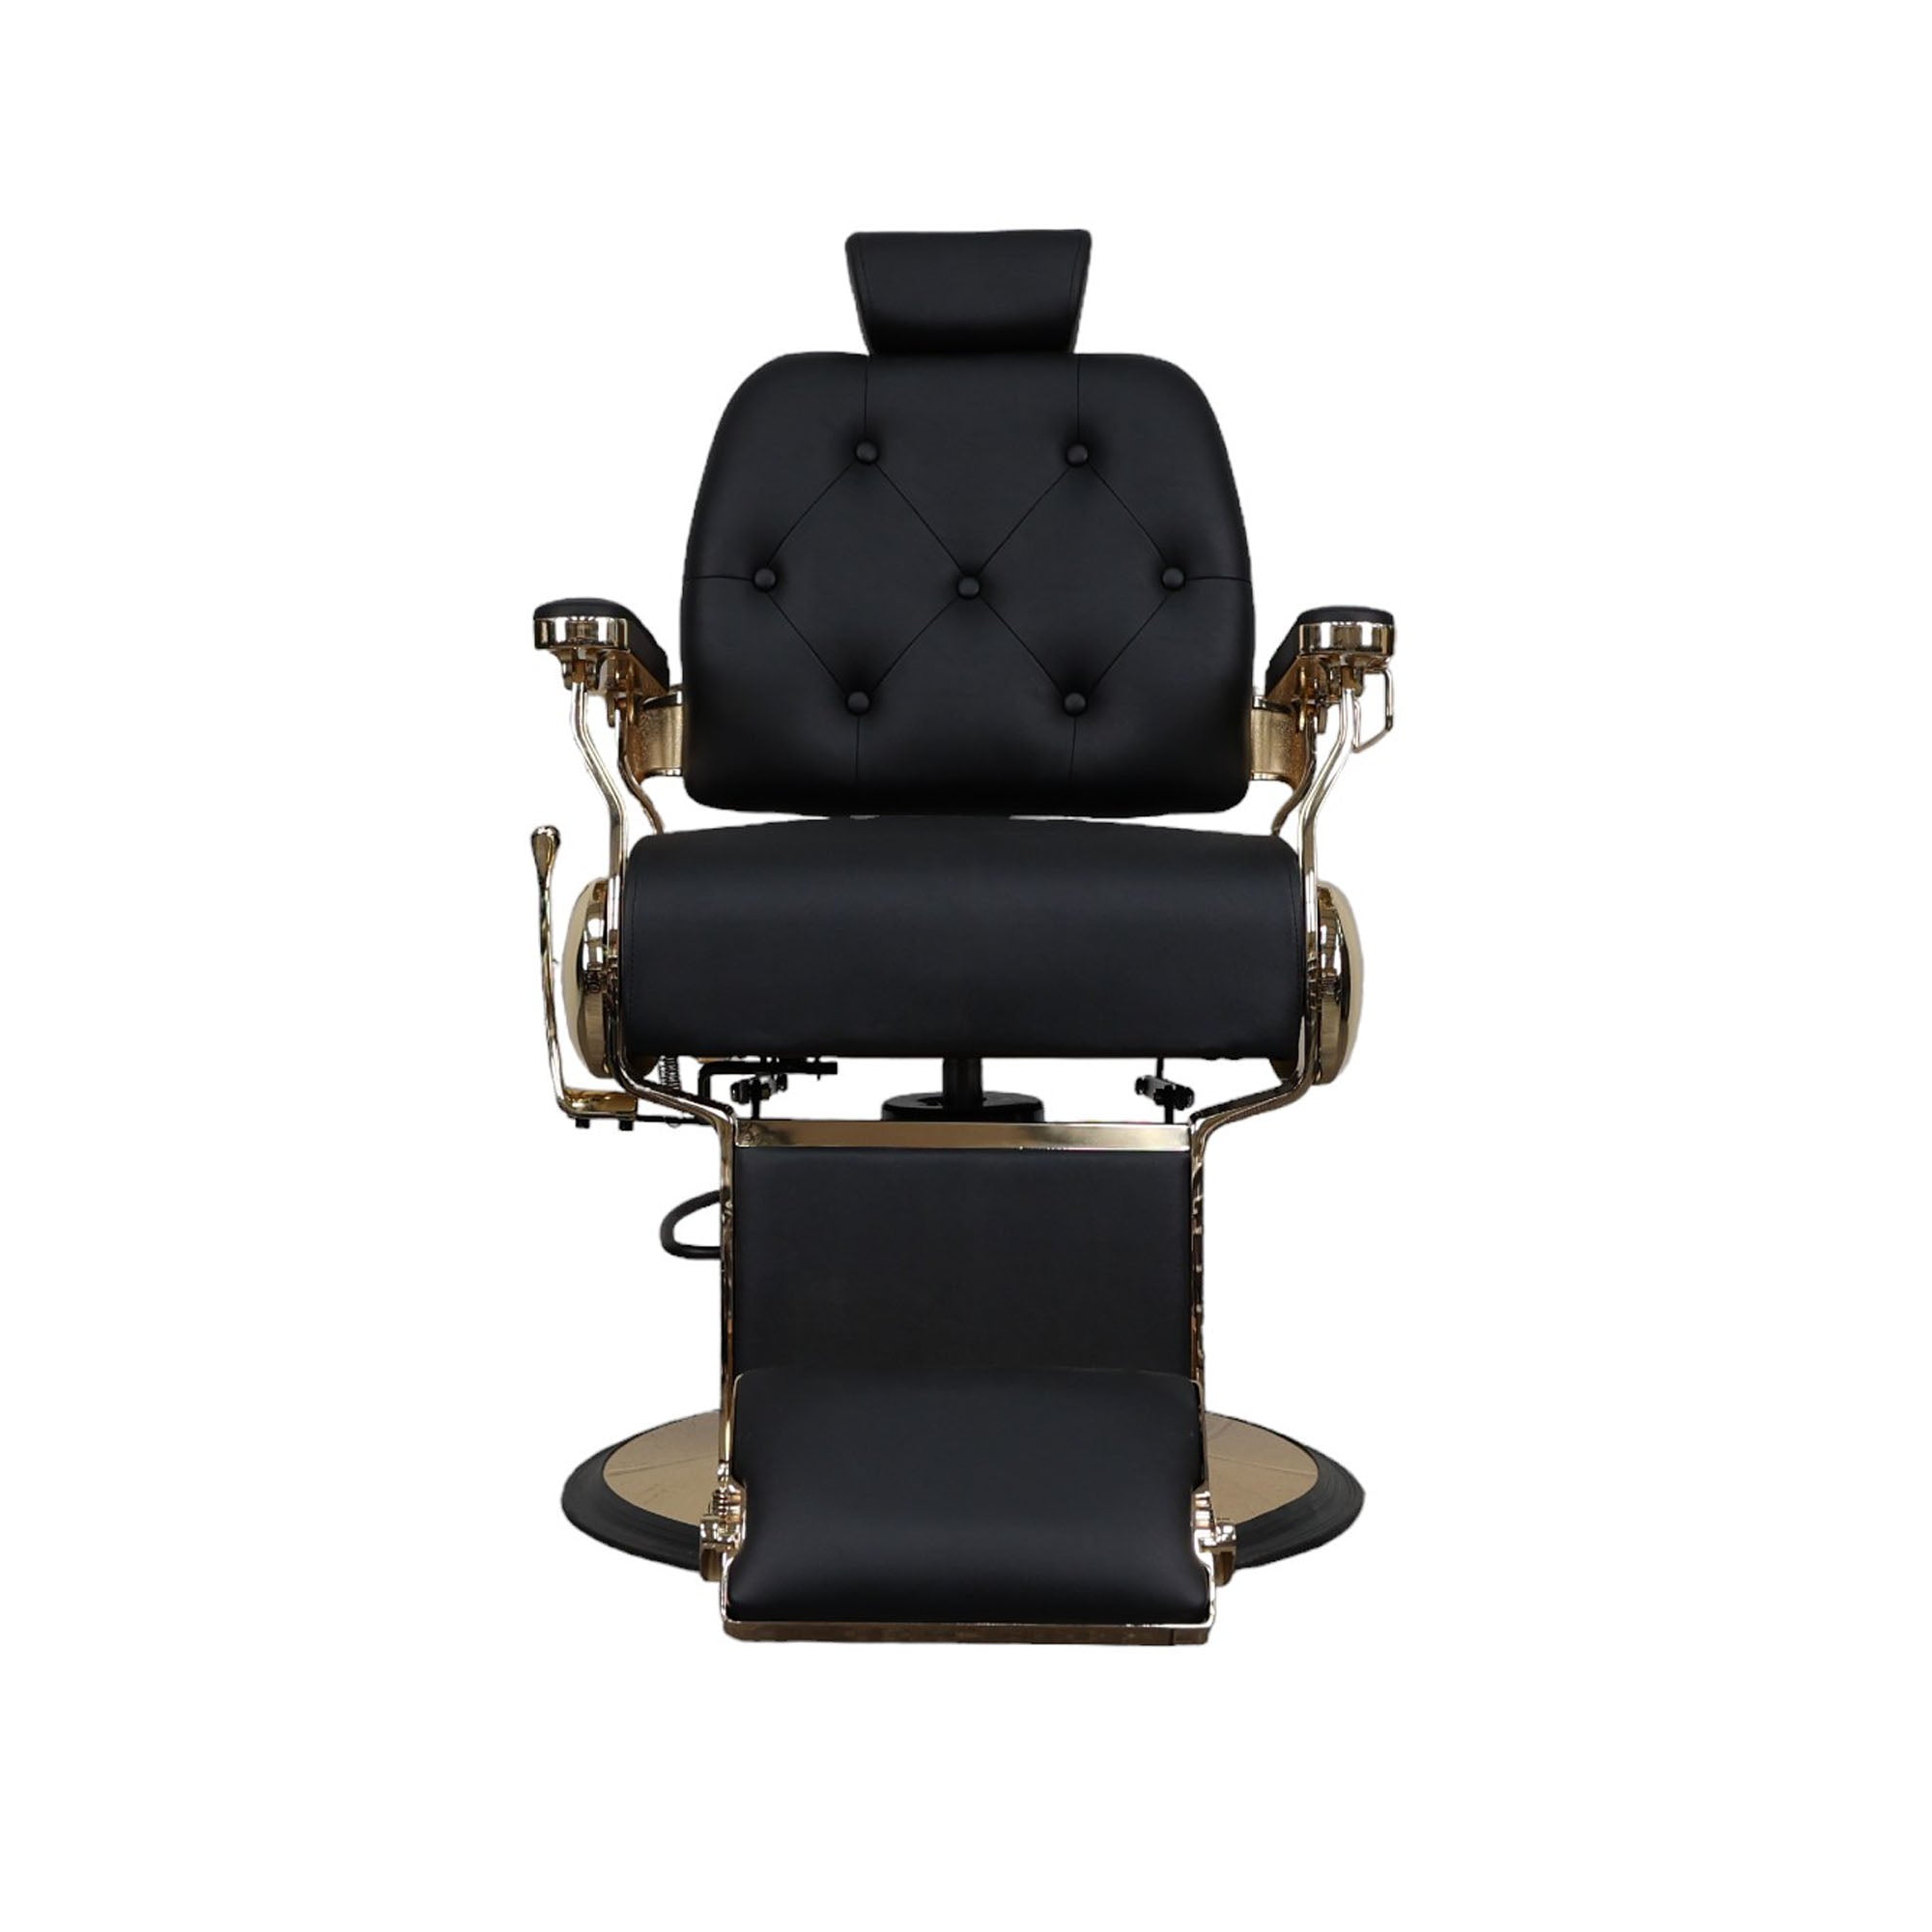 Barber Chair - Luxurious Black Leather with Gold Accents